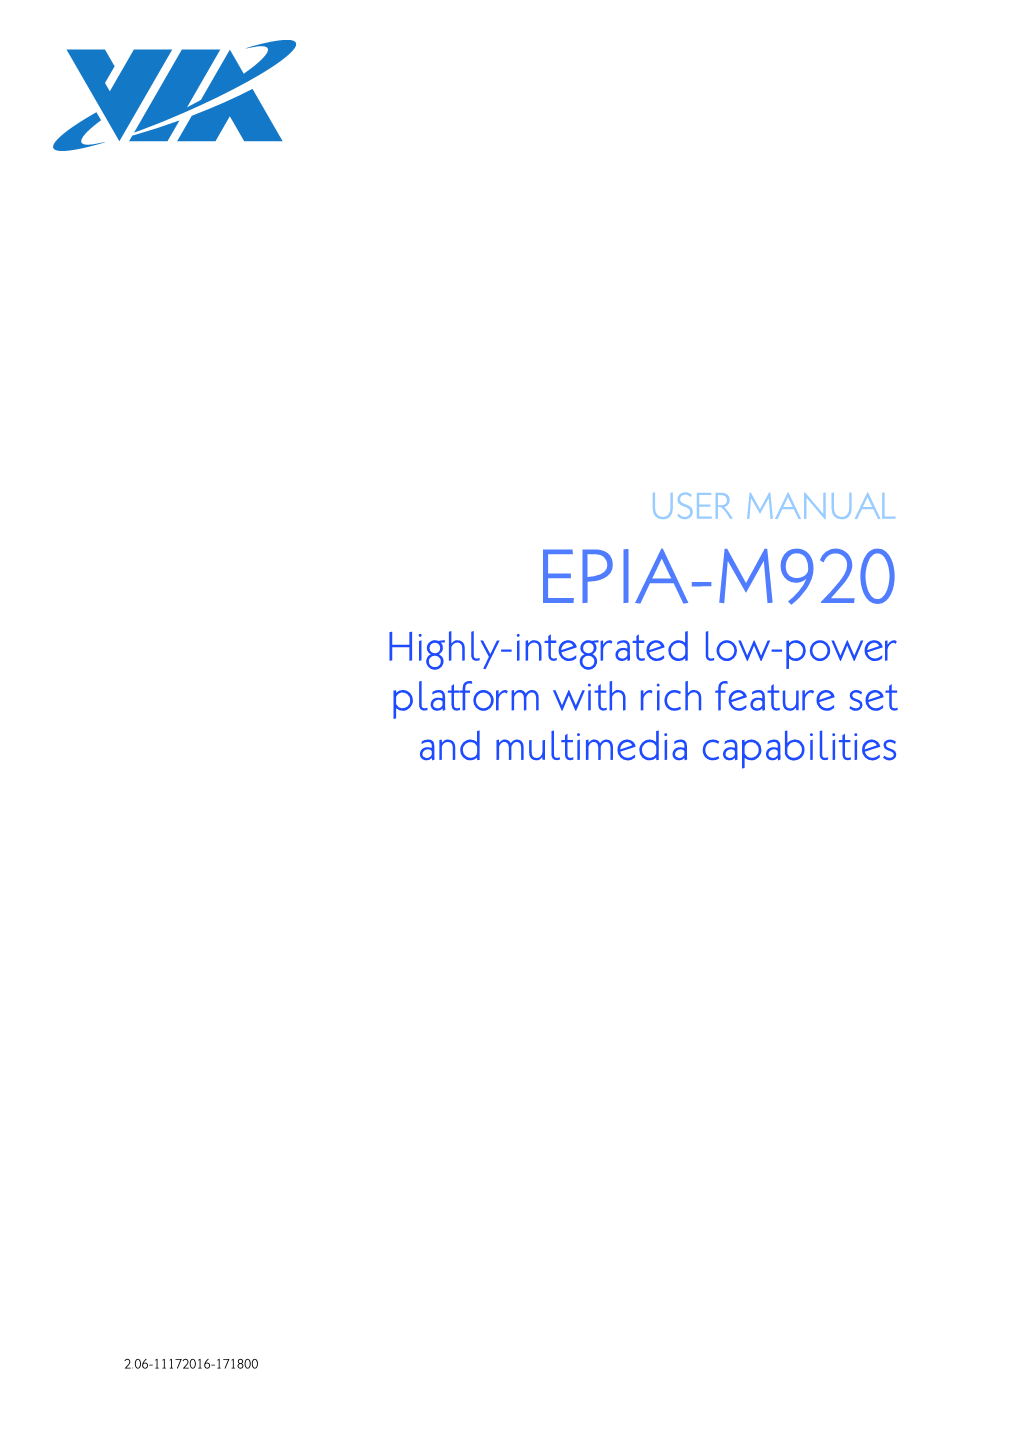 EPIA-M920 Highly-Integrated Low-Power Platform with Rich Feature Set and Multimedia Capabilities